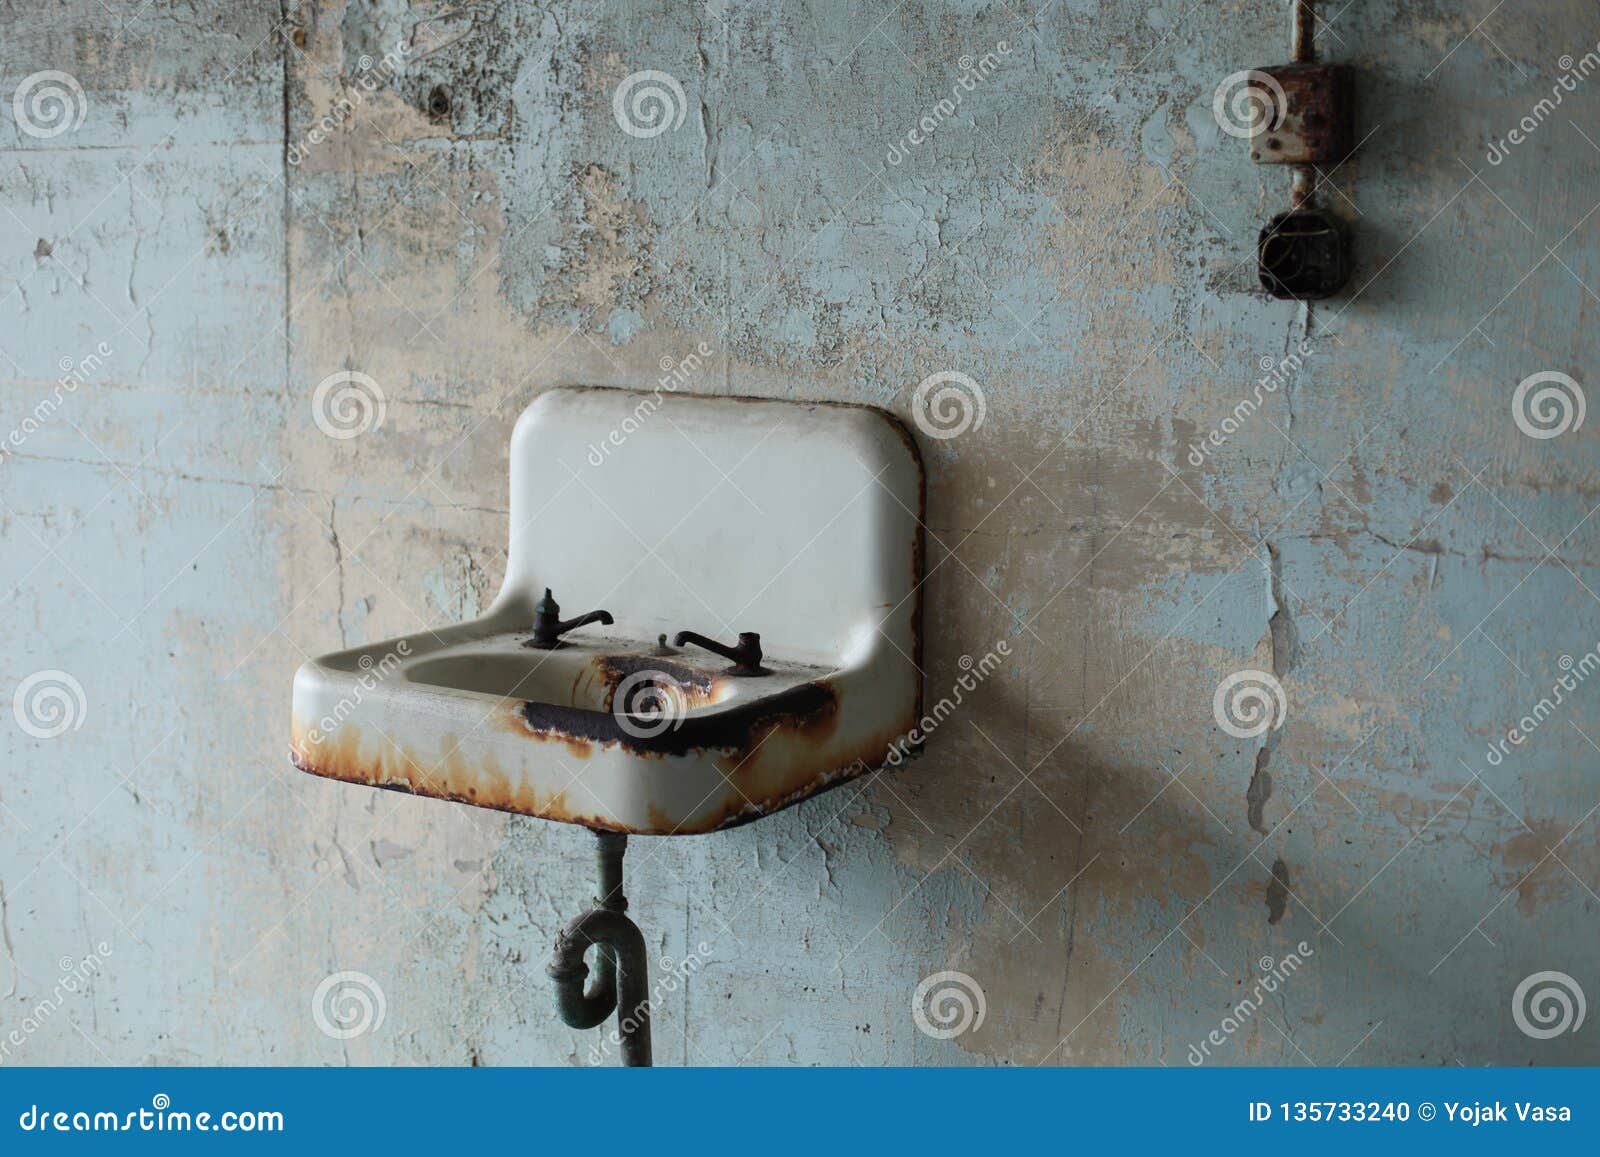 Old Rusted Sink With Broken Fixtures Stock Photo Image Of Sink